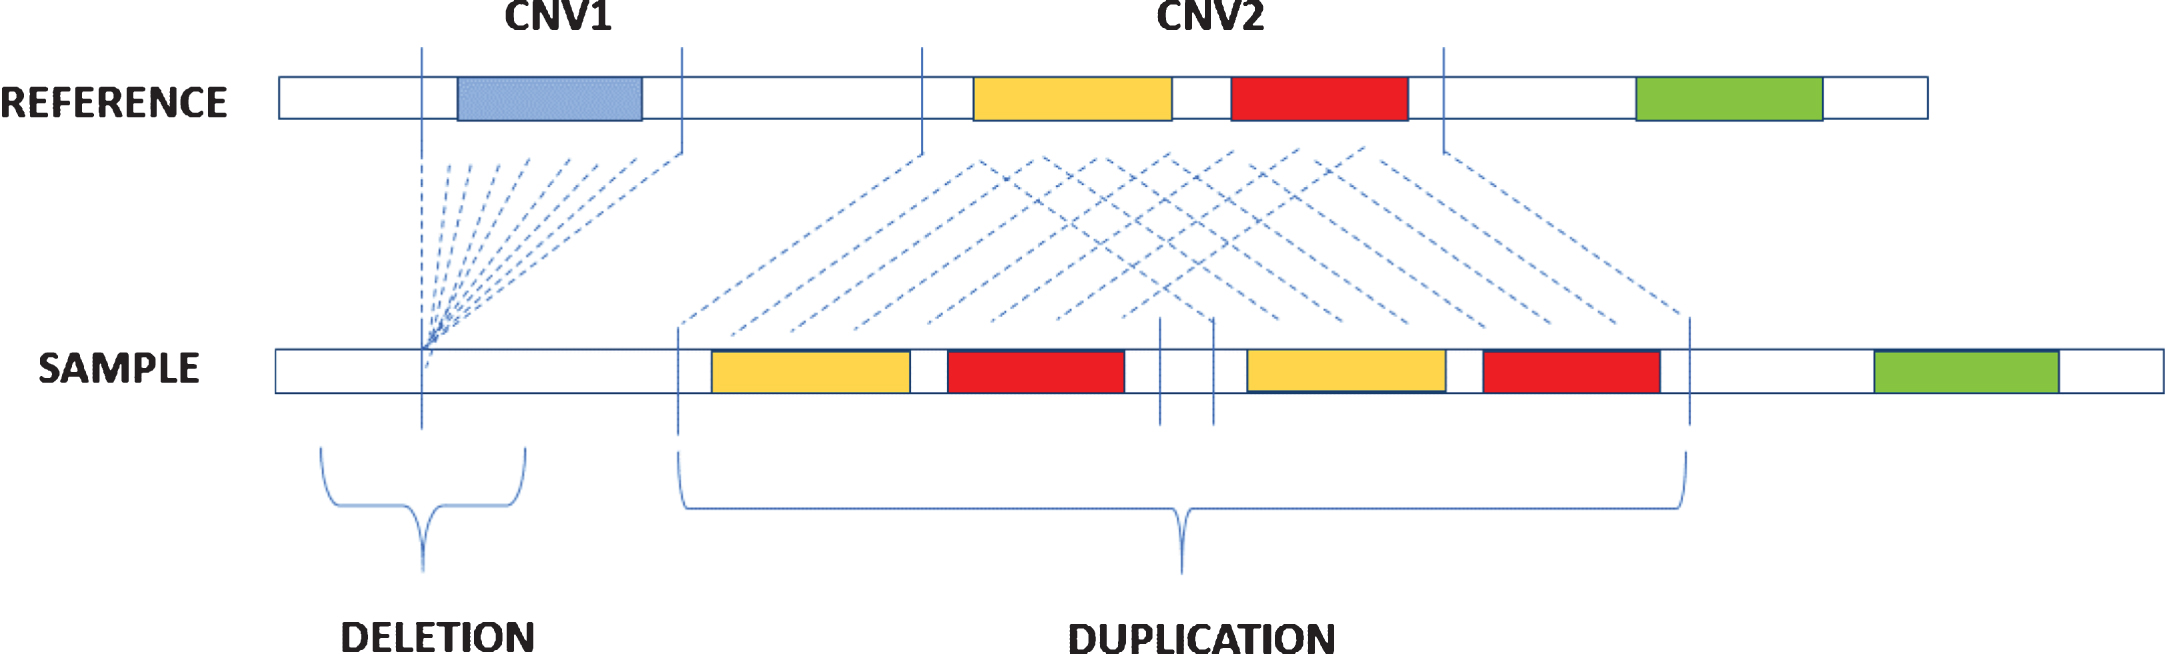 Description of deletion and duplication. Deletion occurs when in the sample genome there is a loss of a DNA segment in comparison with a reference genome while duplication is caused by the repetition of DNA segments.